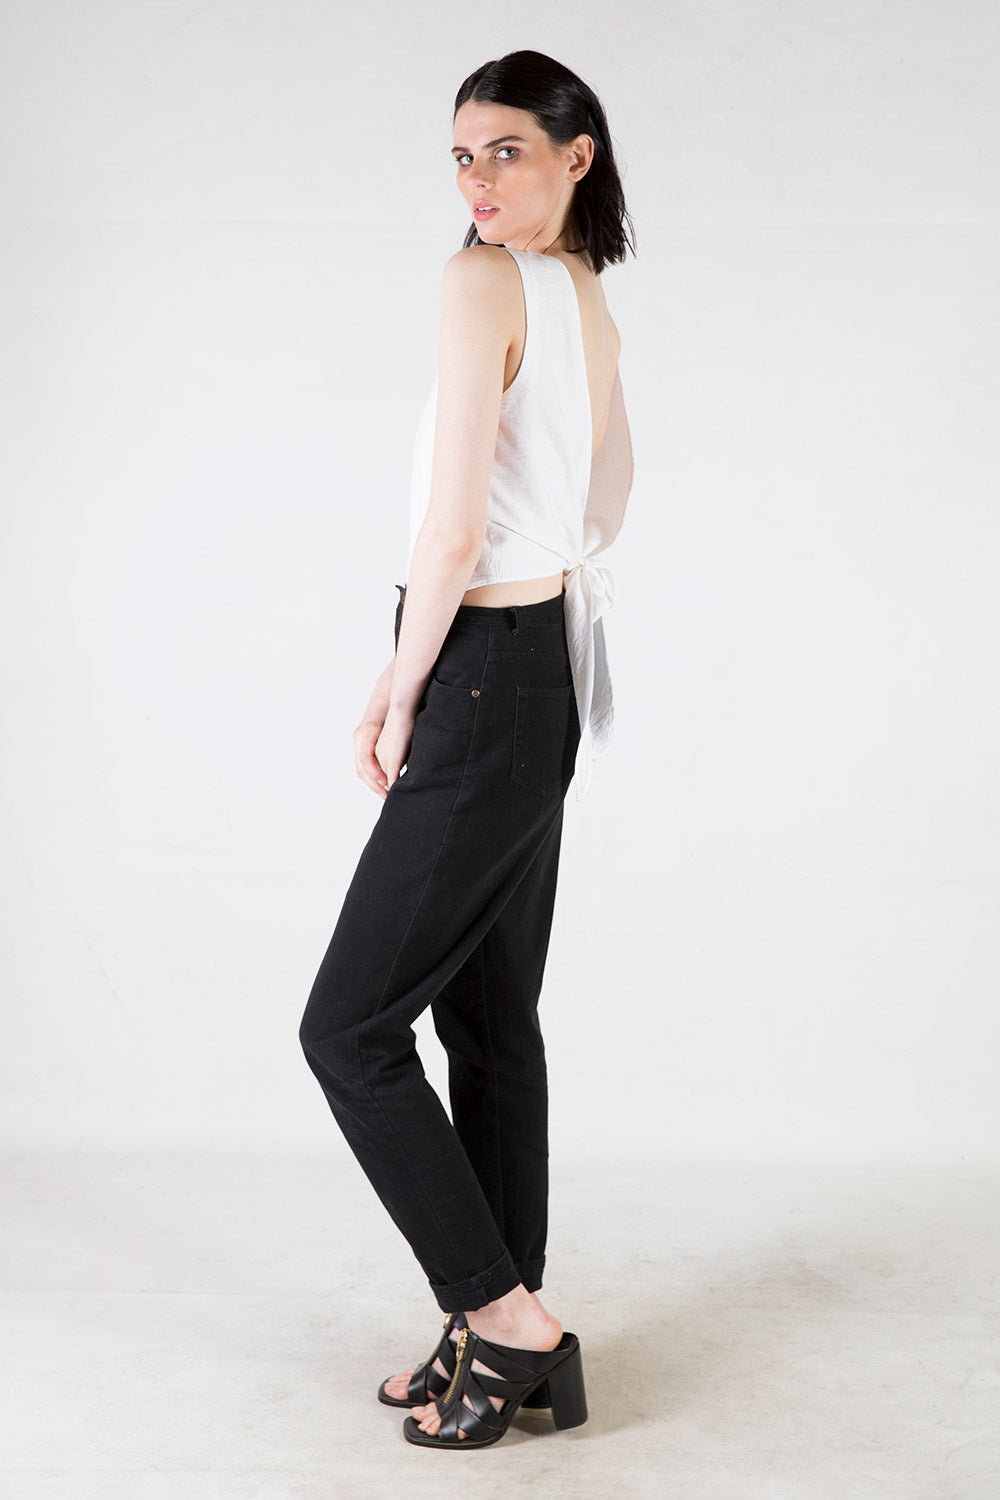 Henry Tie Top | Young + Resolute | Annah Stretton